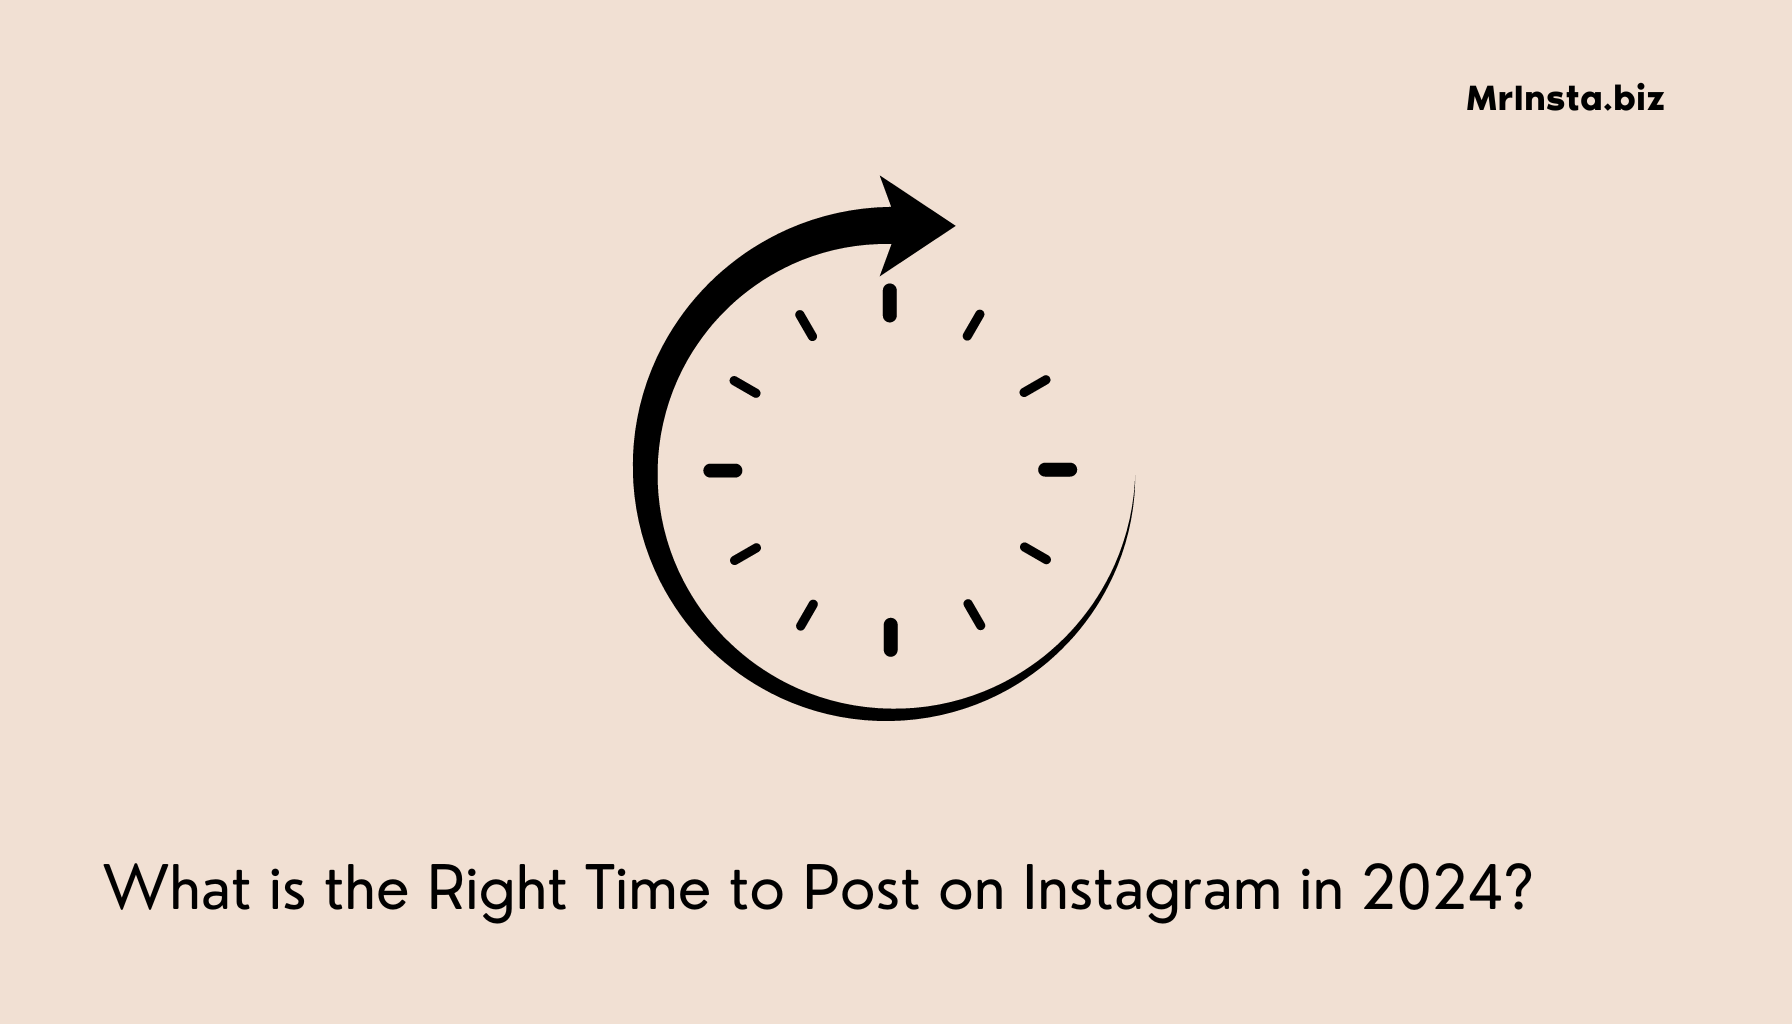 What is the Right Time to Post on Instagram in 2024?